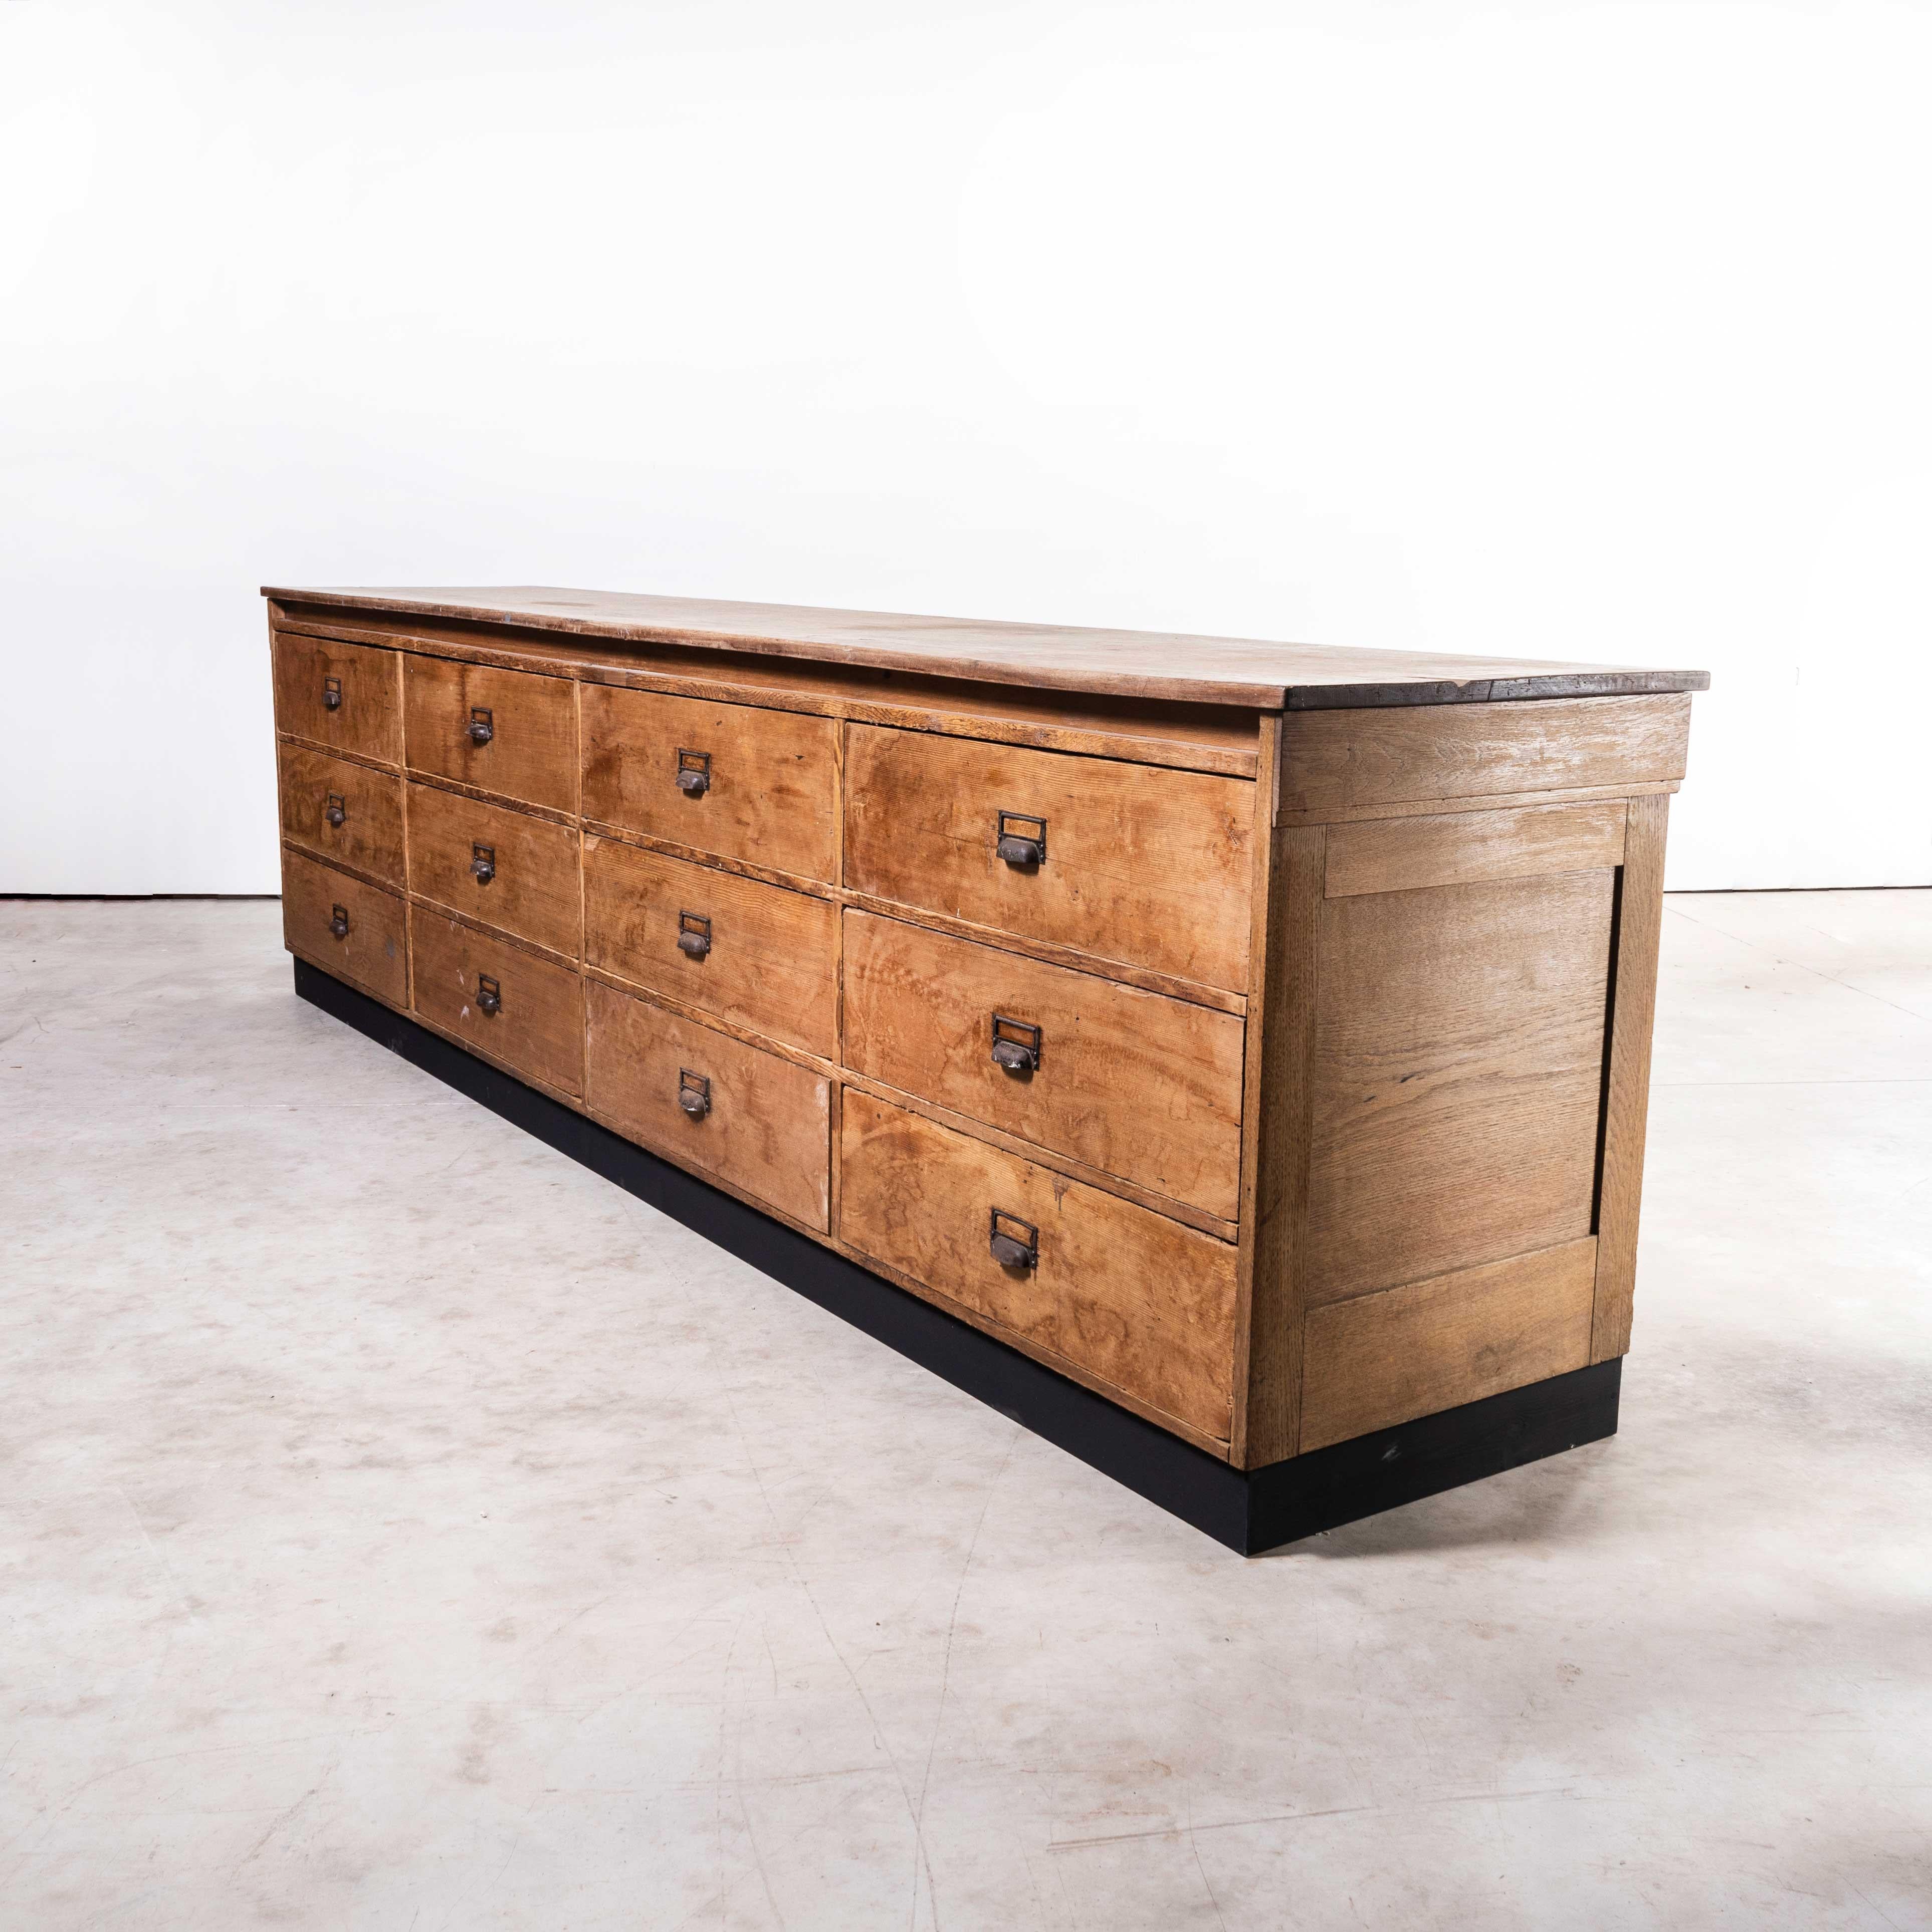 1950s long low large twelve drawer pine worshop bank of drawers
1950s long low large twelve drawer pine worshop bank of drawers. Wonderful large three metre workshop bank of drawers made with clear pitch pine throughout with a heavy well figured